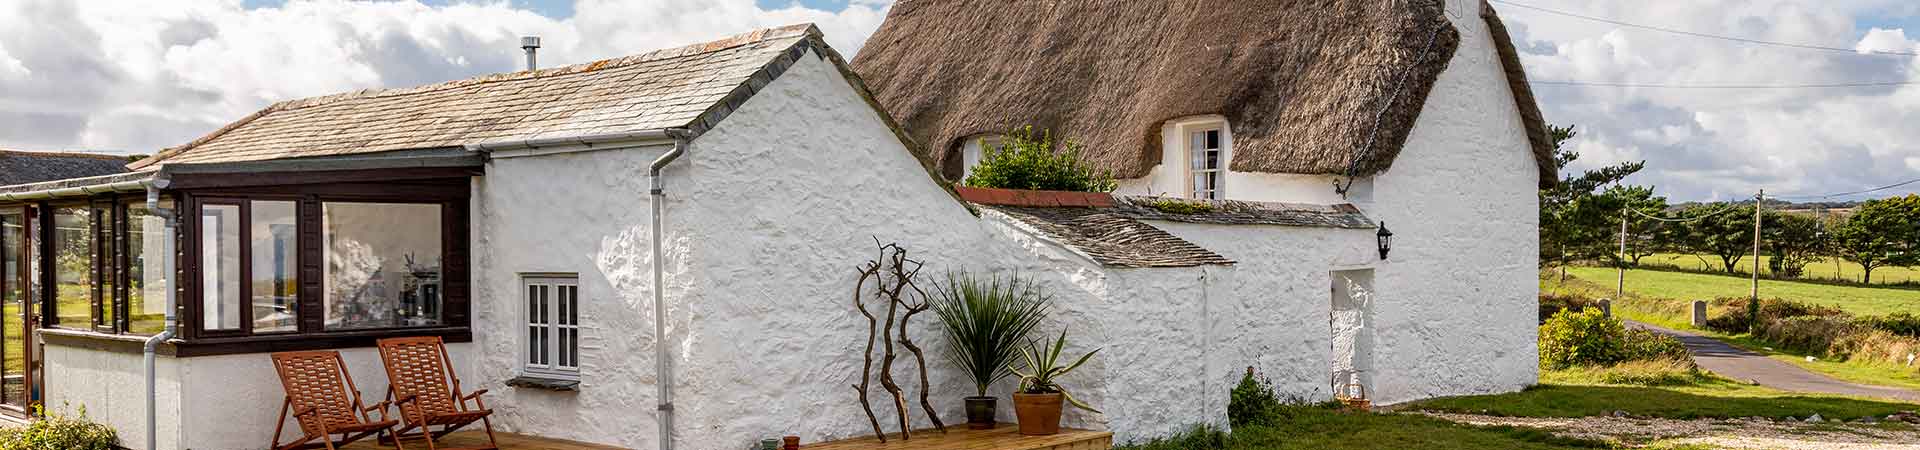 Thatched holiday cottages in The Cotswolds